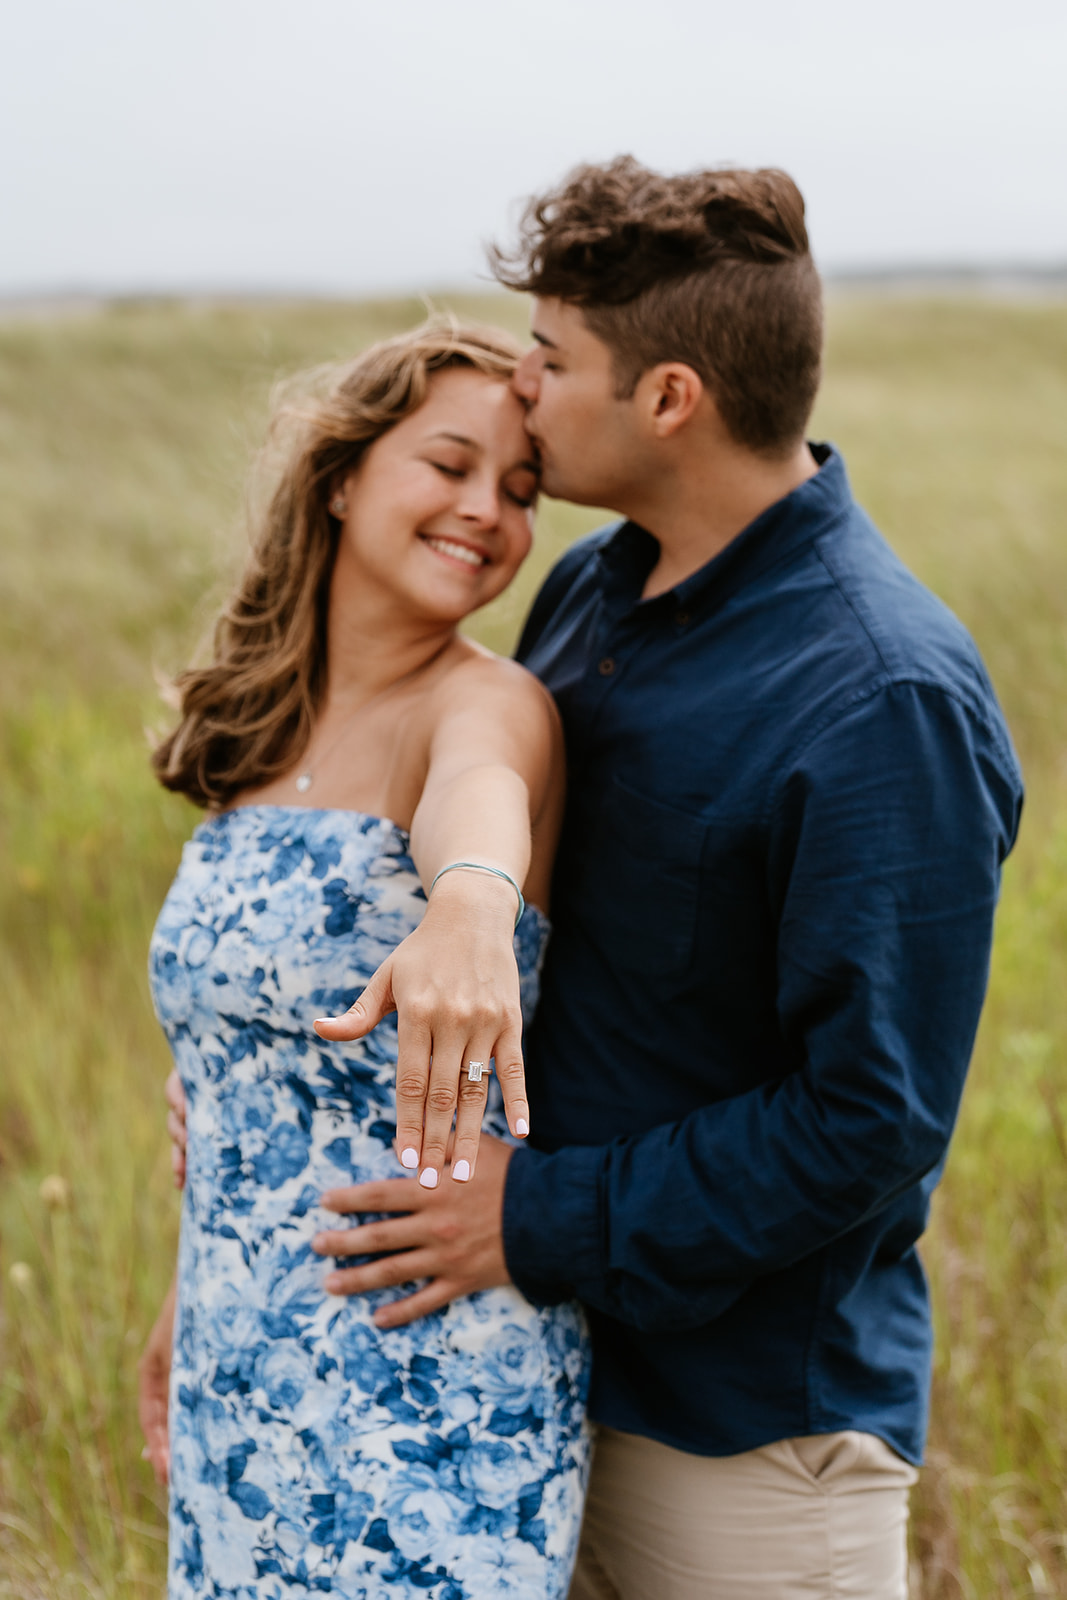 A happy couple embracing in a grassy field, with the woman showing off her engagement ring, both smiling towards the camera.